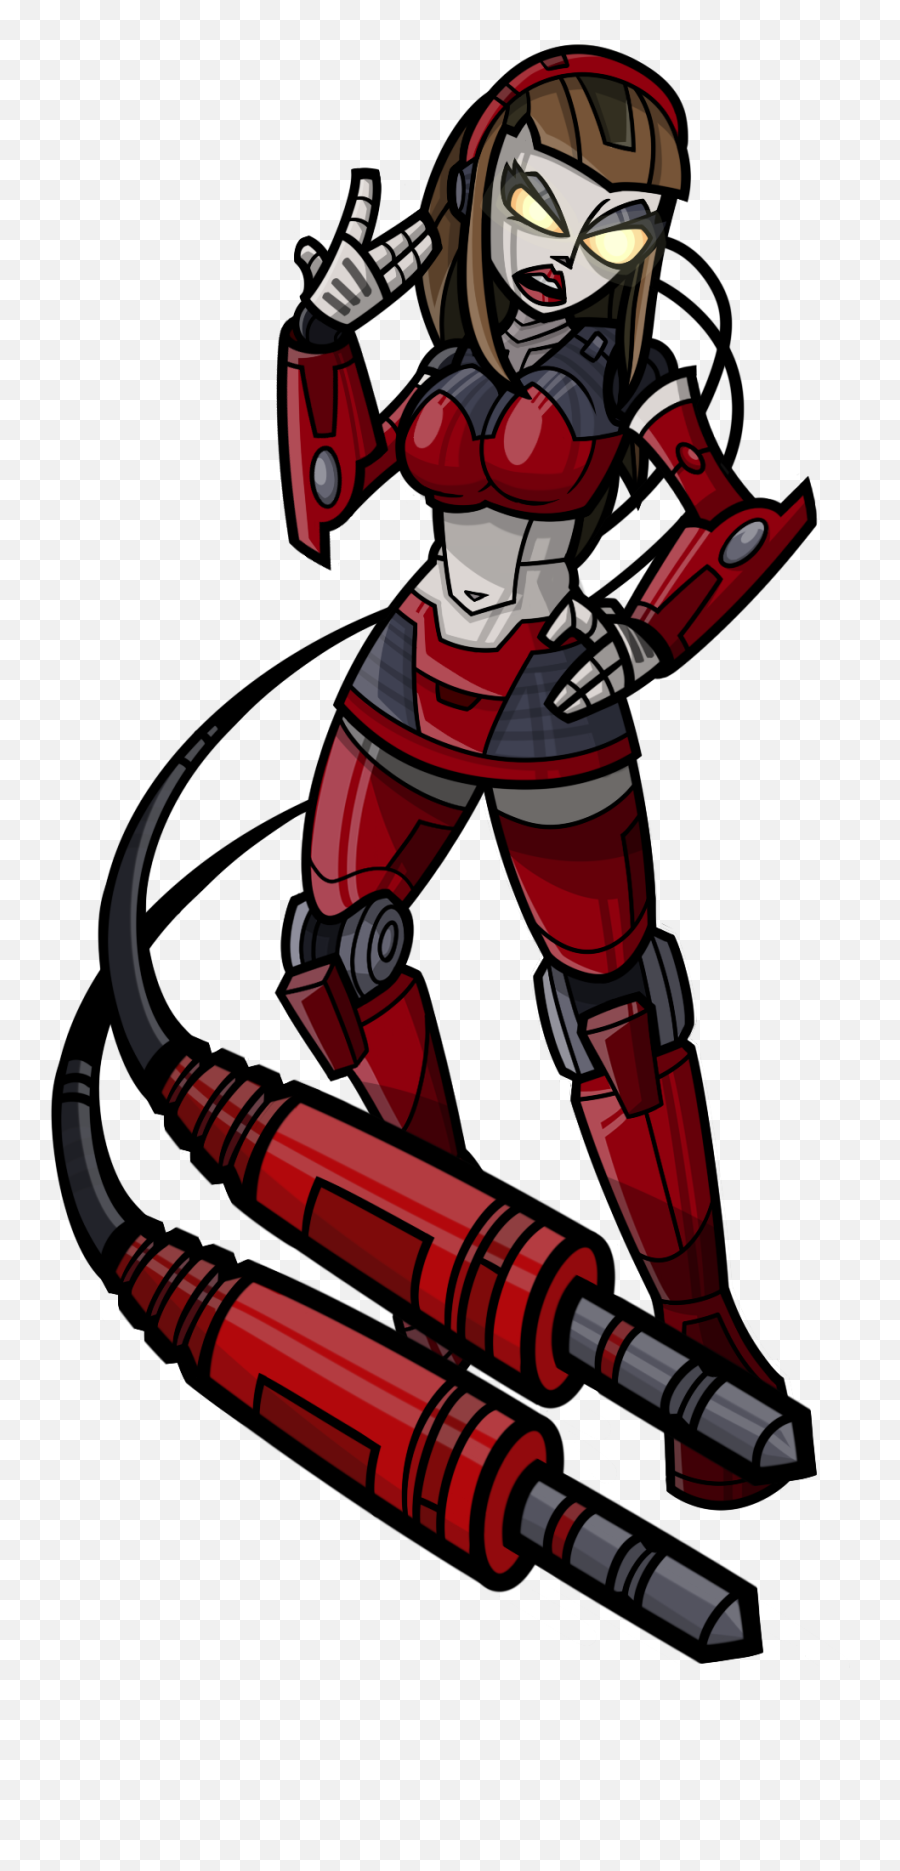 Heres Some Art Of Courtney Gears From - Ratchet And Clank Gears Png,Ratchet Png